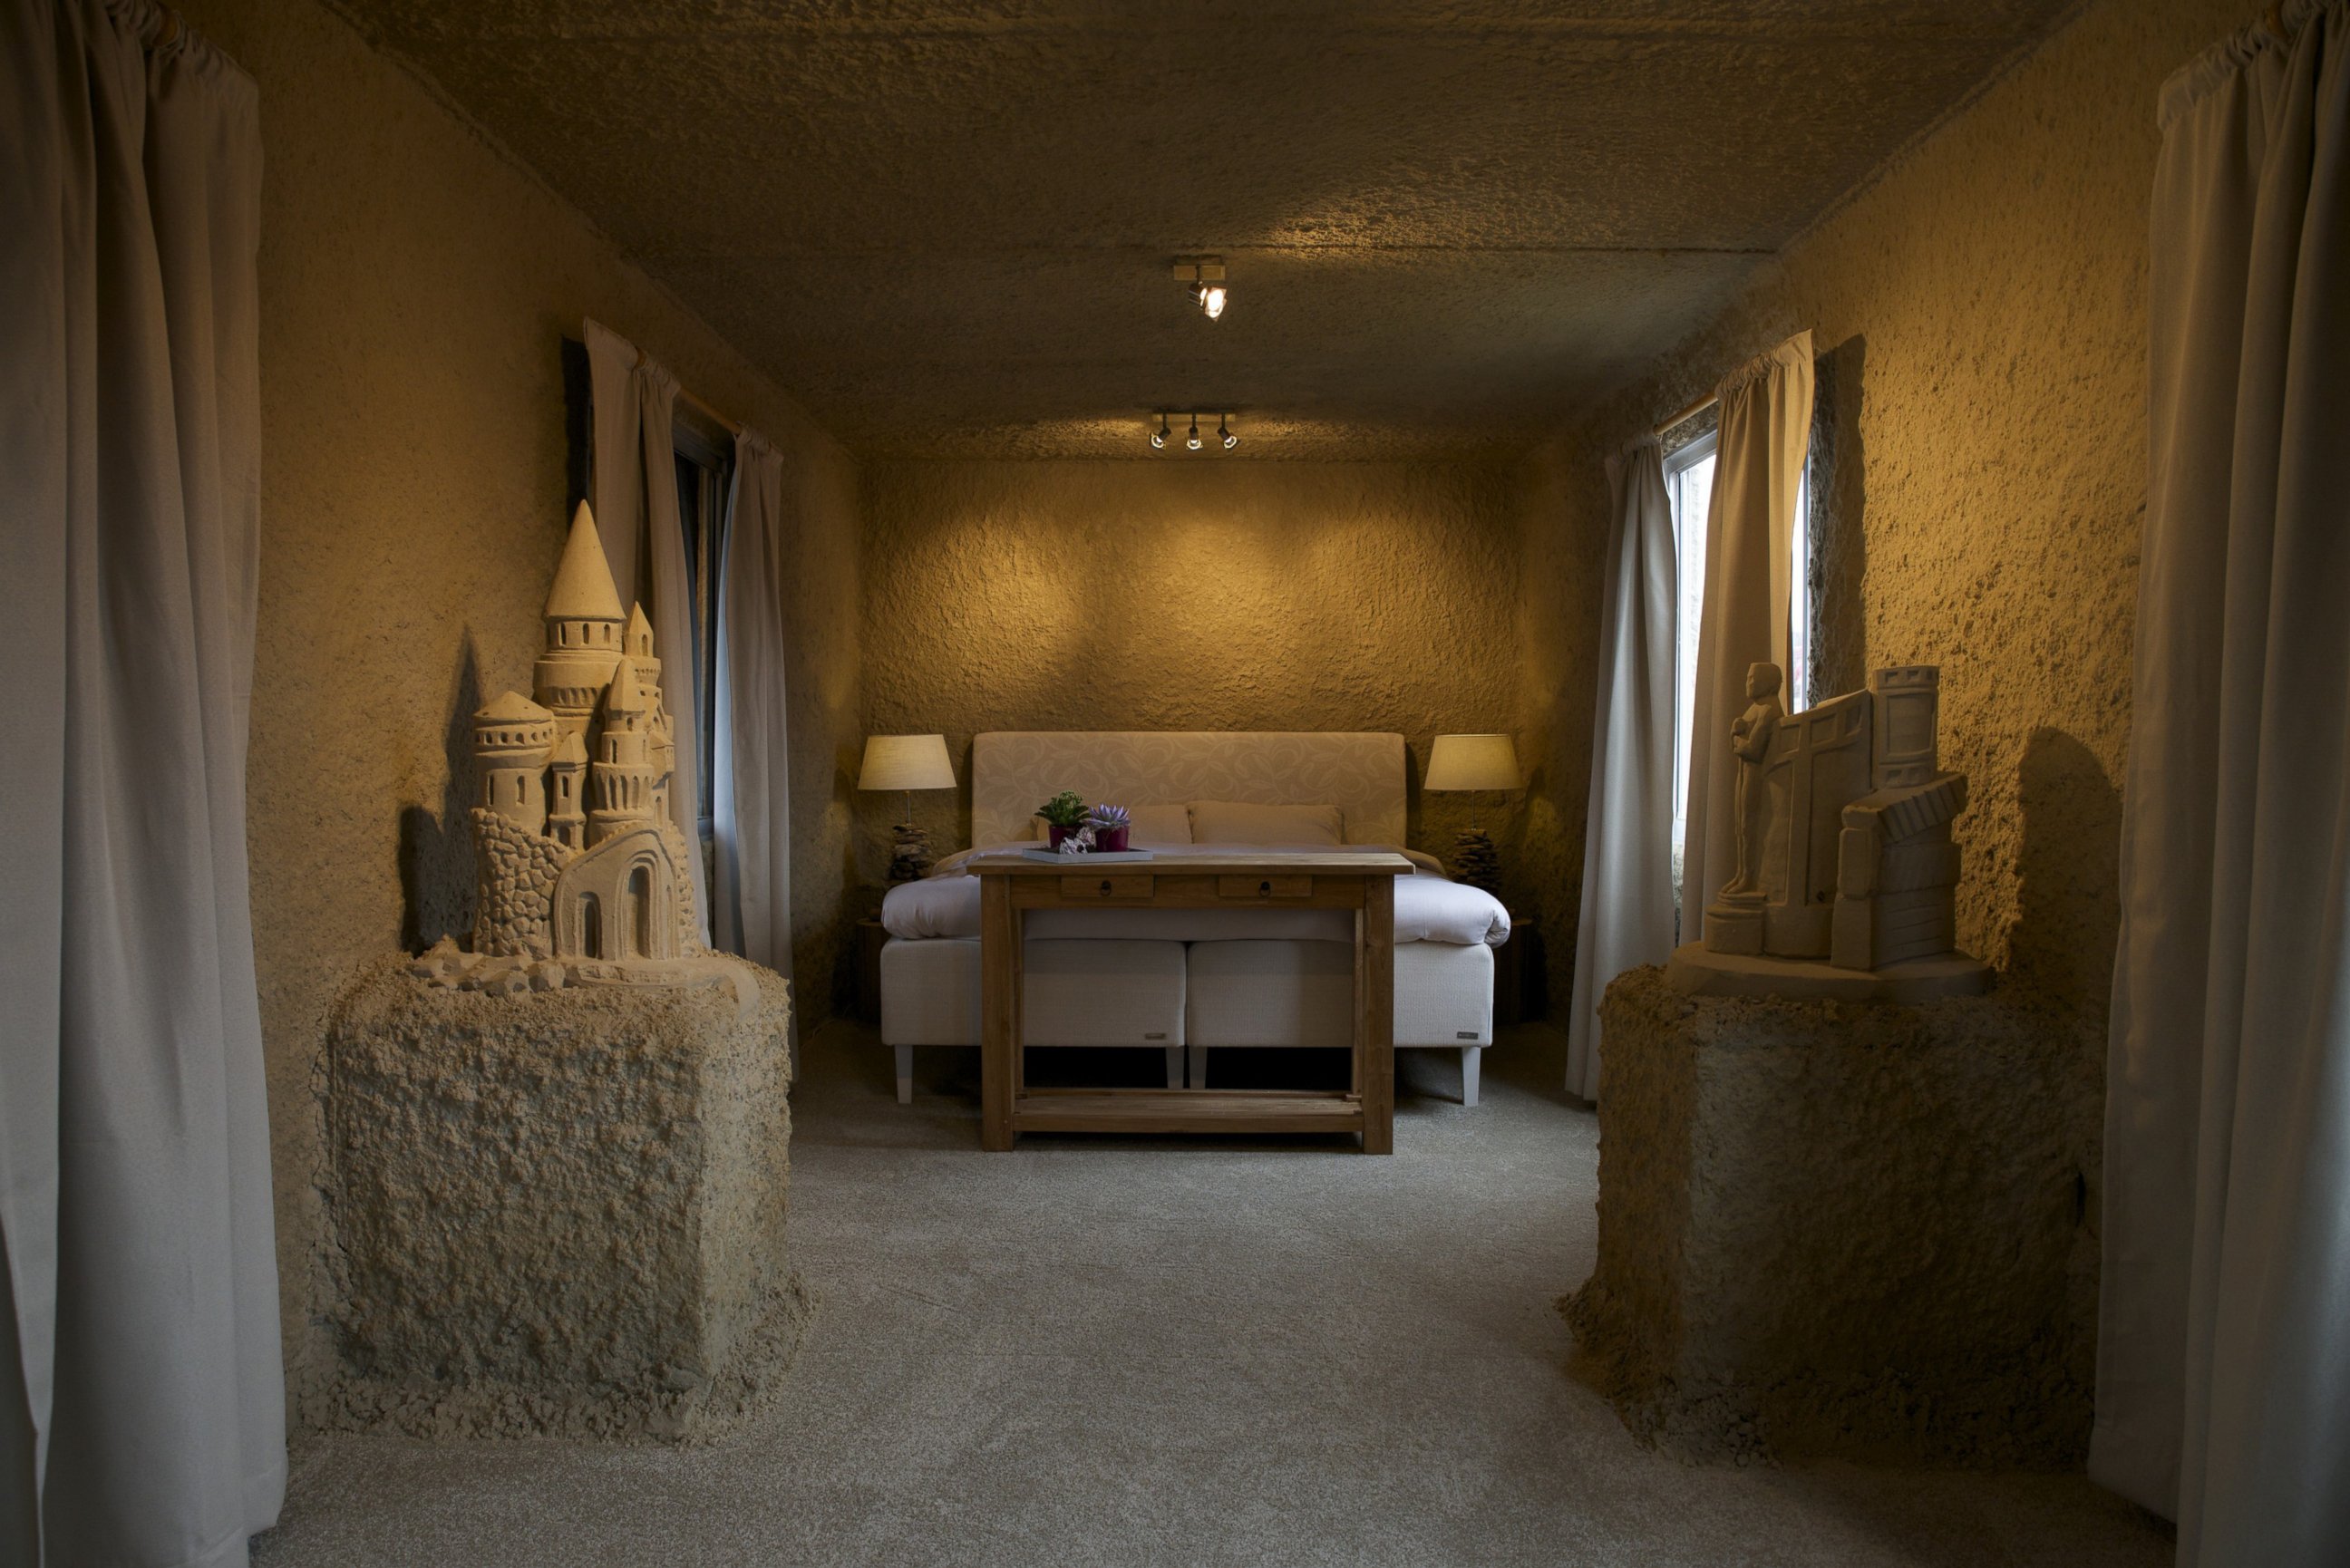 PHOTO:The Zand Hotel in the Dutch cities of Sneek and Oss is the first sand hotel in the world.  